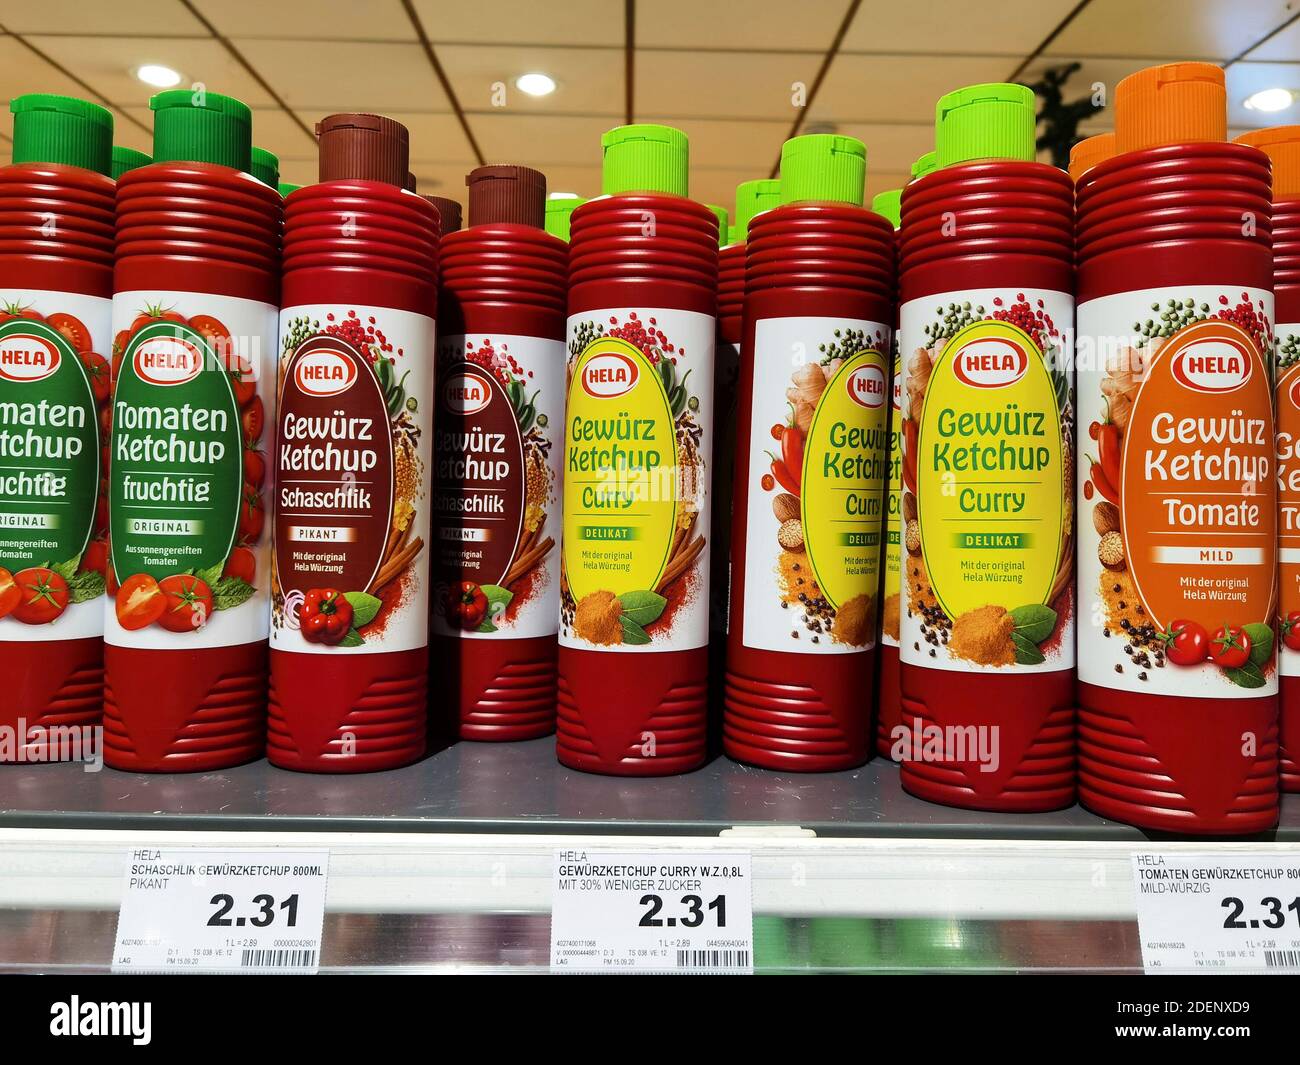 Hela Ketchup High Resolution Stock Photography and Images - Alamy